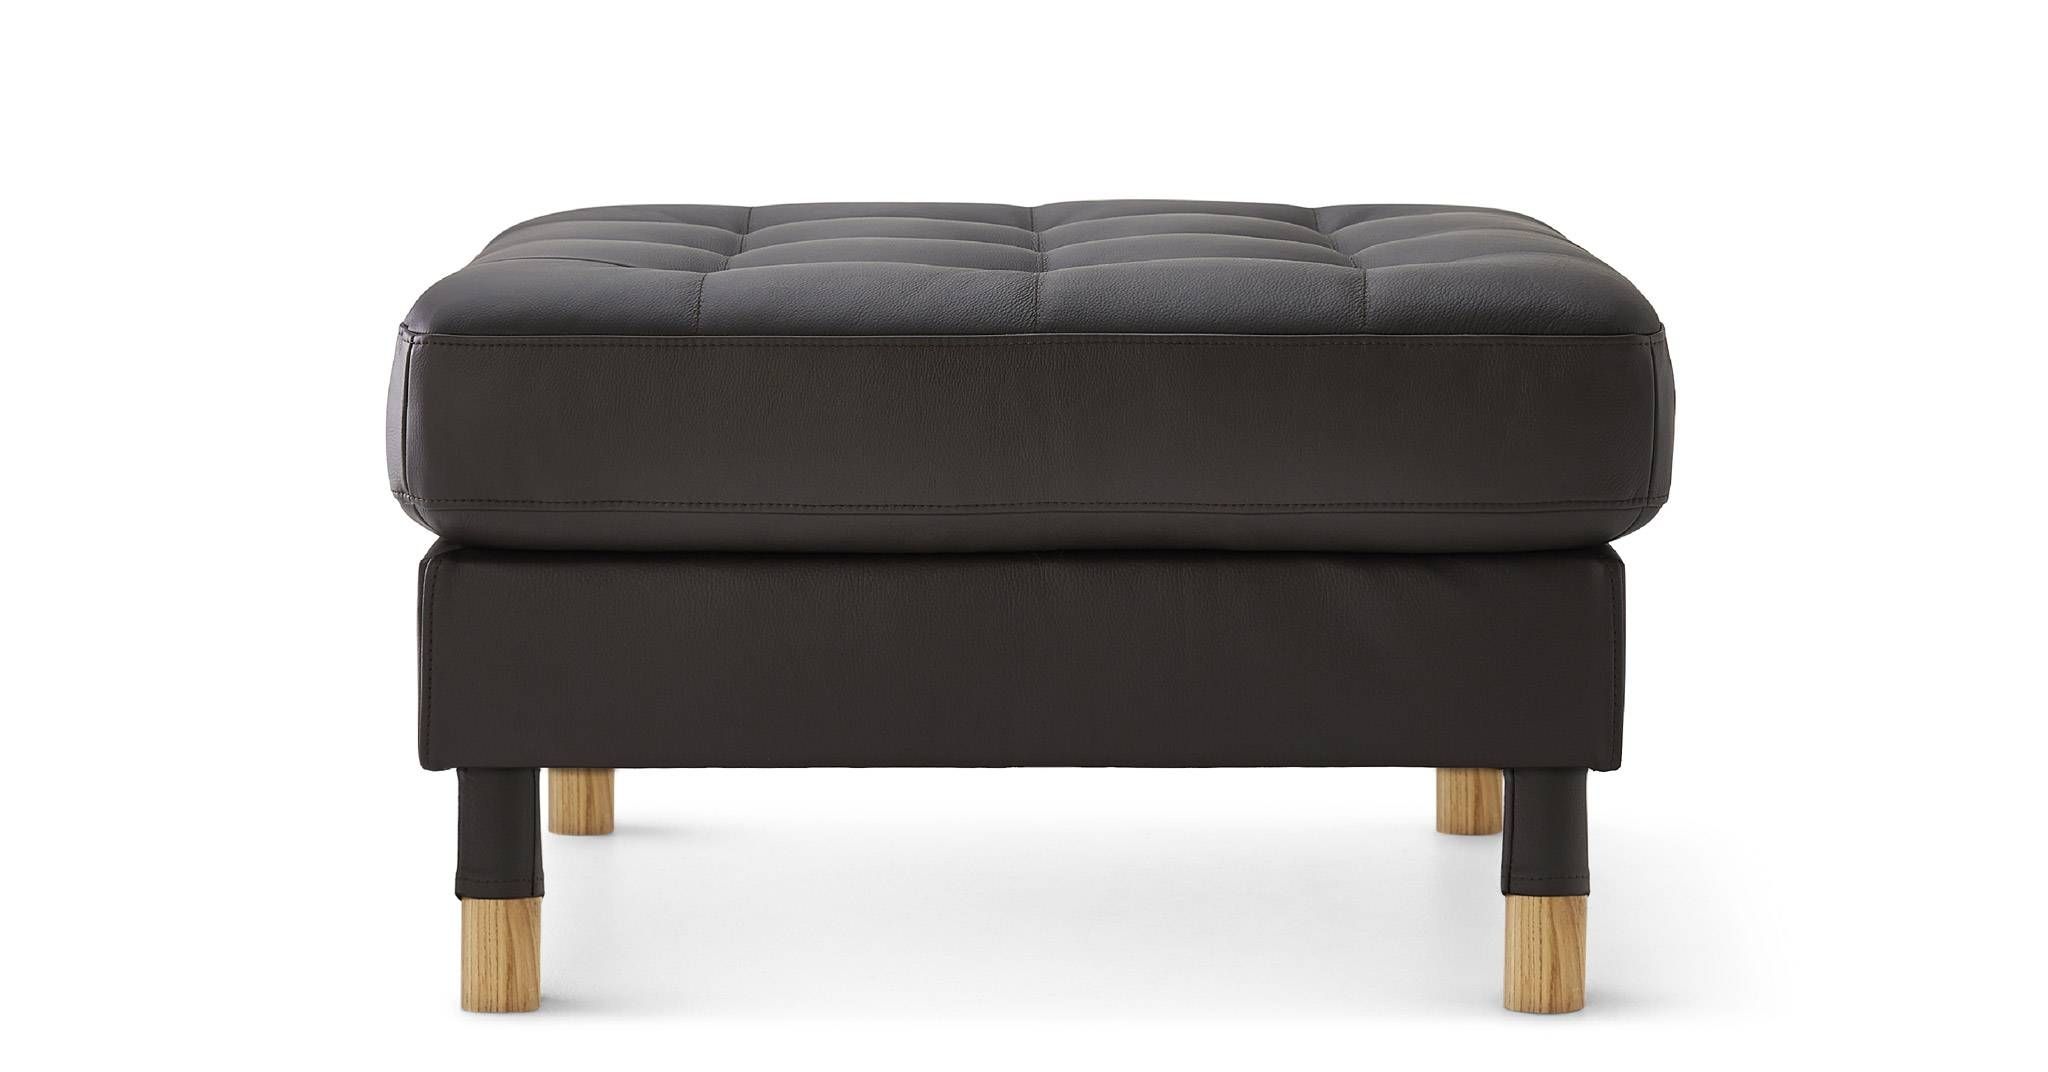 Leather Footstools & Pouffes | Ikea Ireland With Regard To Footstools And Pouffes (Photo 15 of 30)